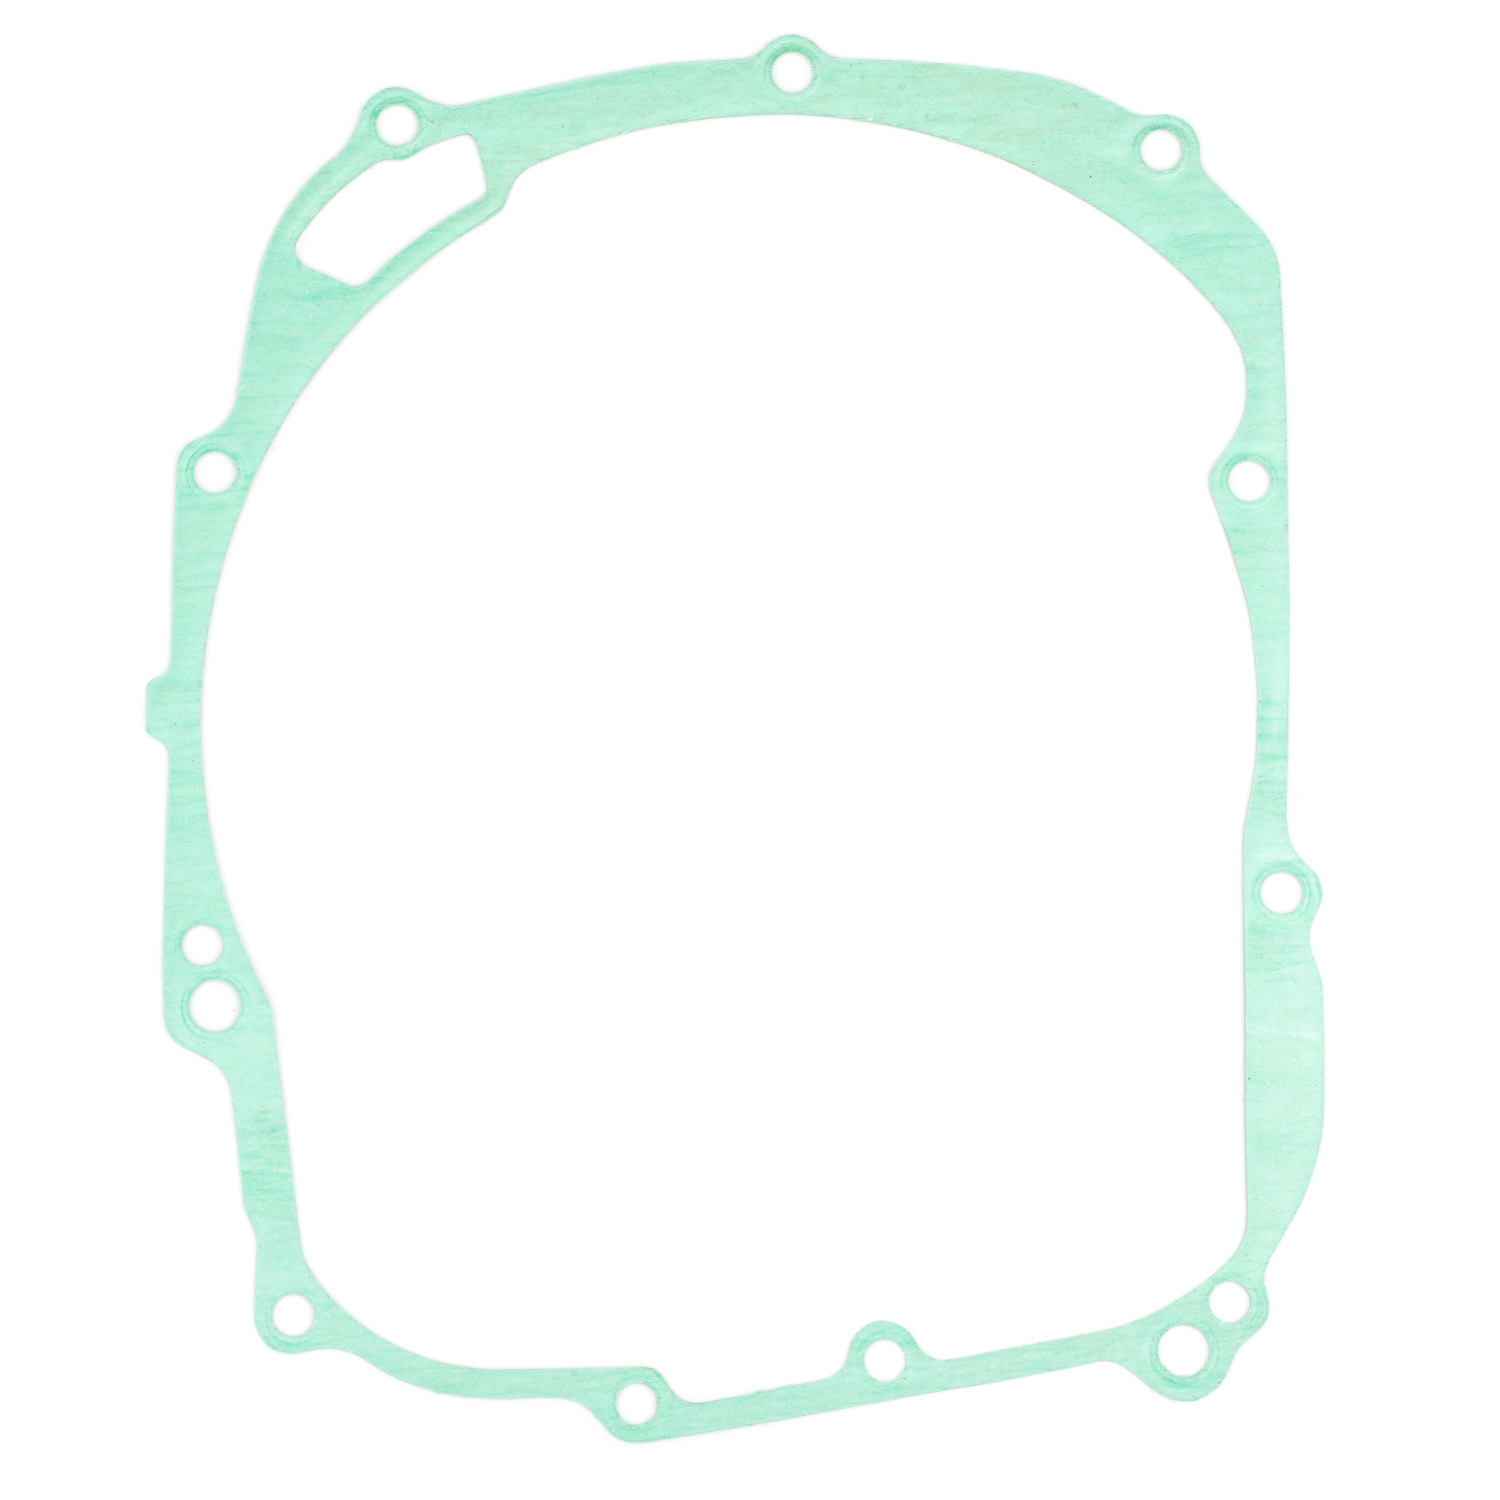 YZF750SP Clutch Cover Gasket